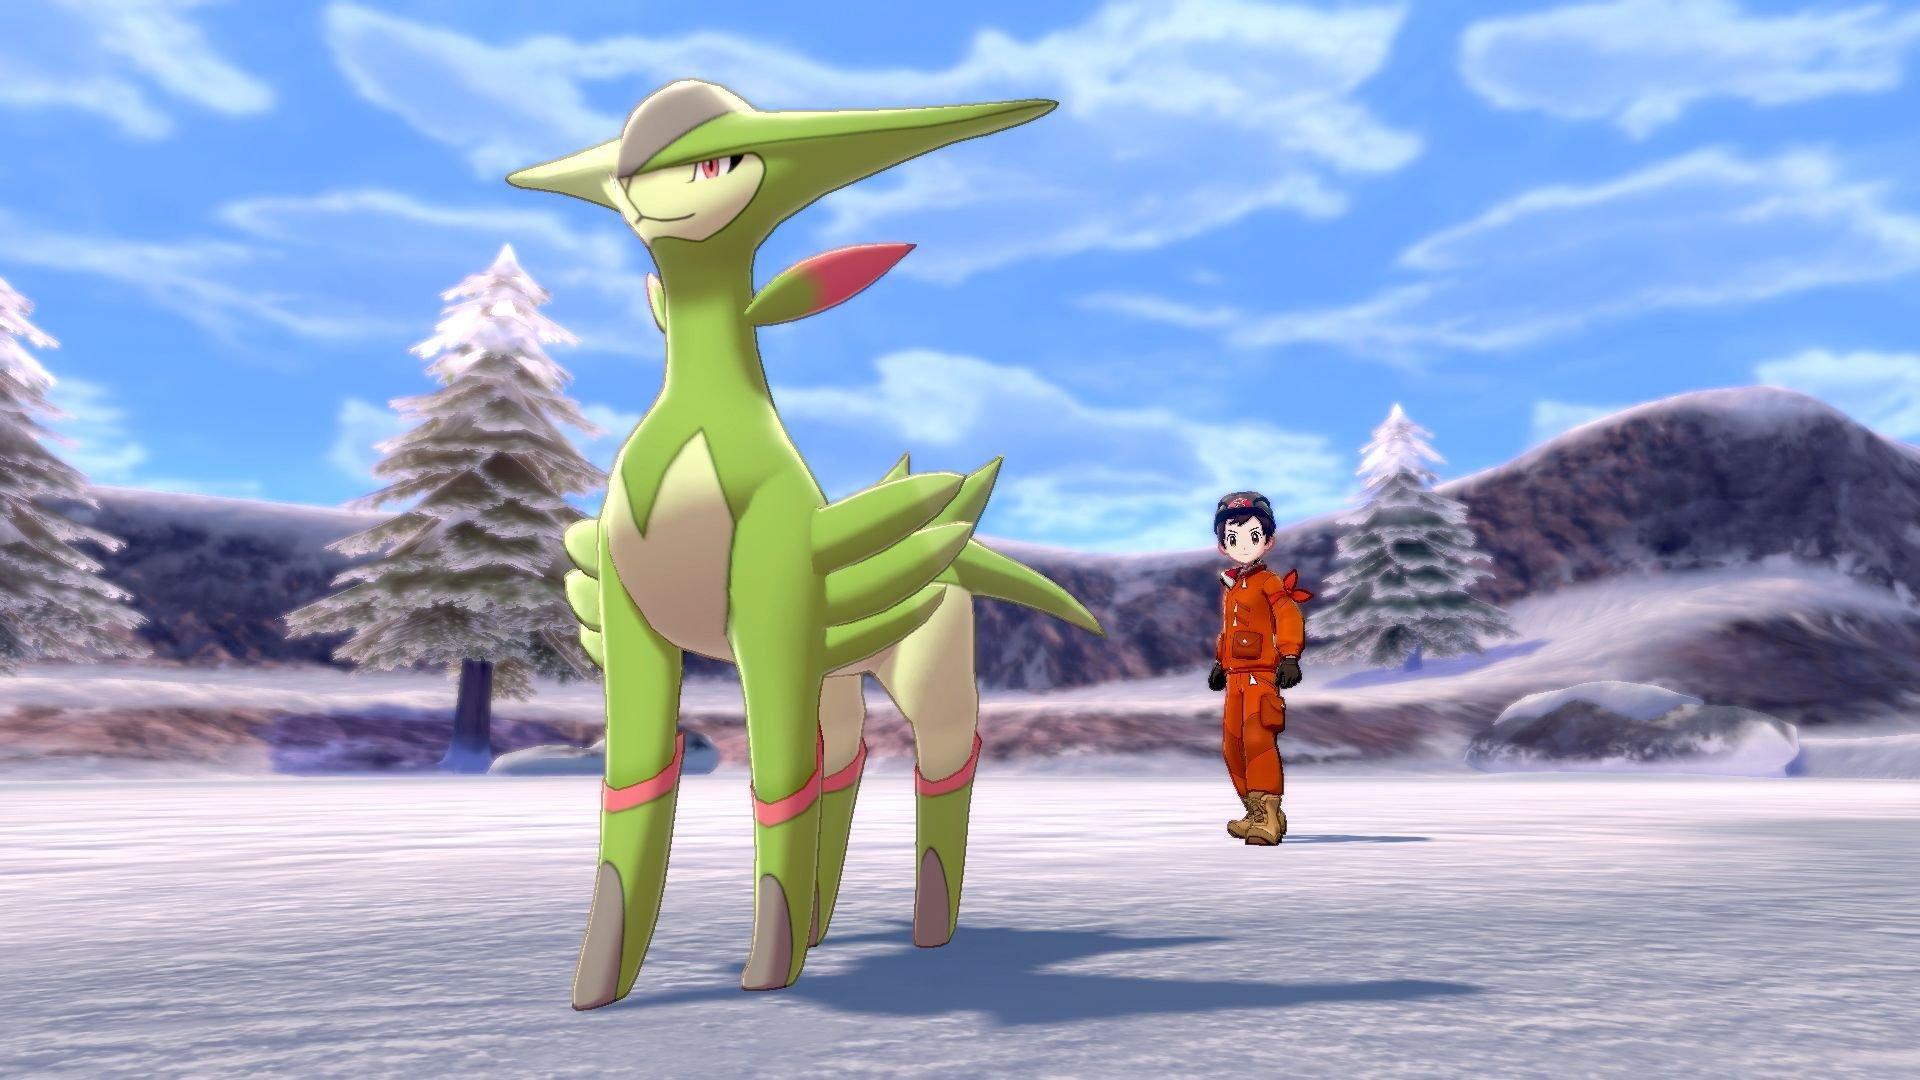 Pokémon Sword and Shield's expansions continues to stoke Pokedex